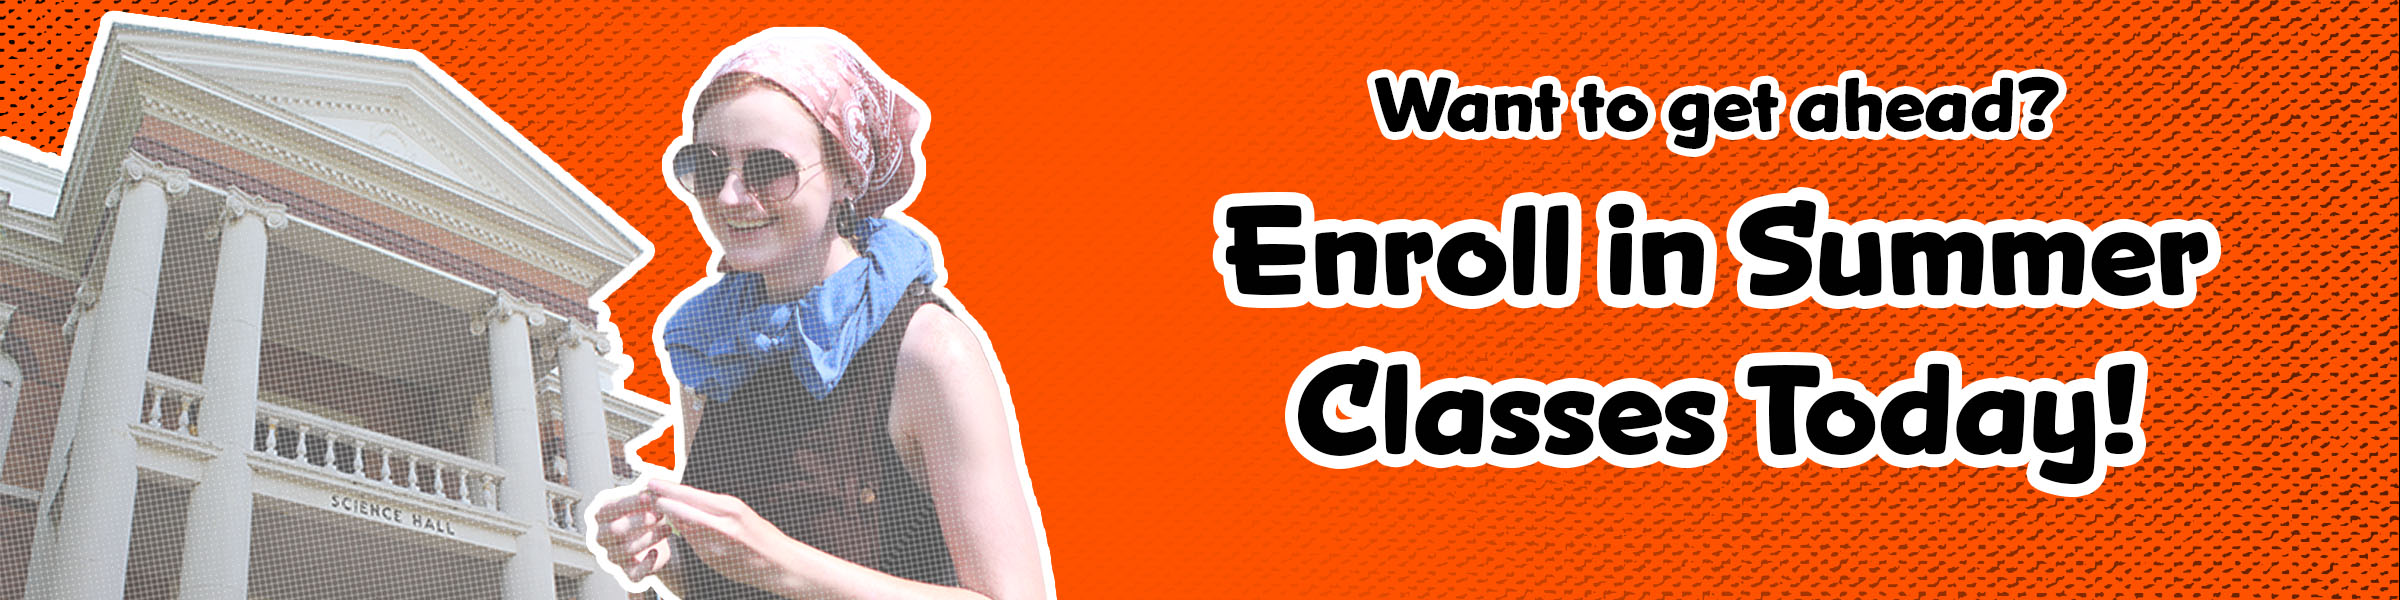 Want to get ahead? Enroll in summer classes!